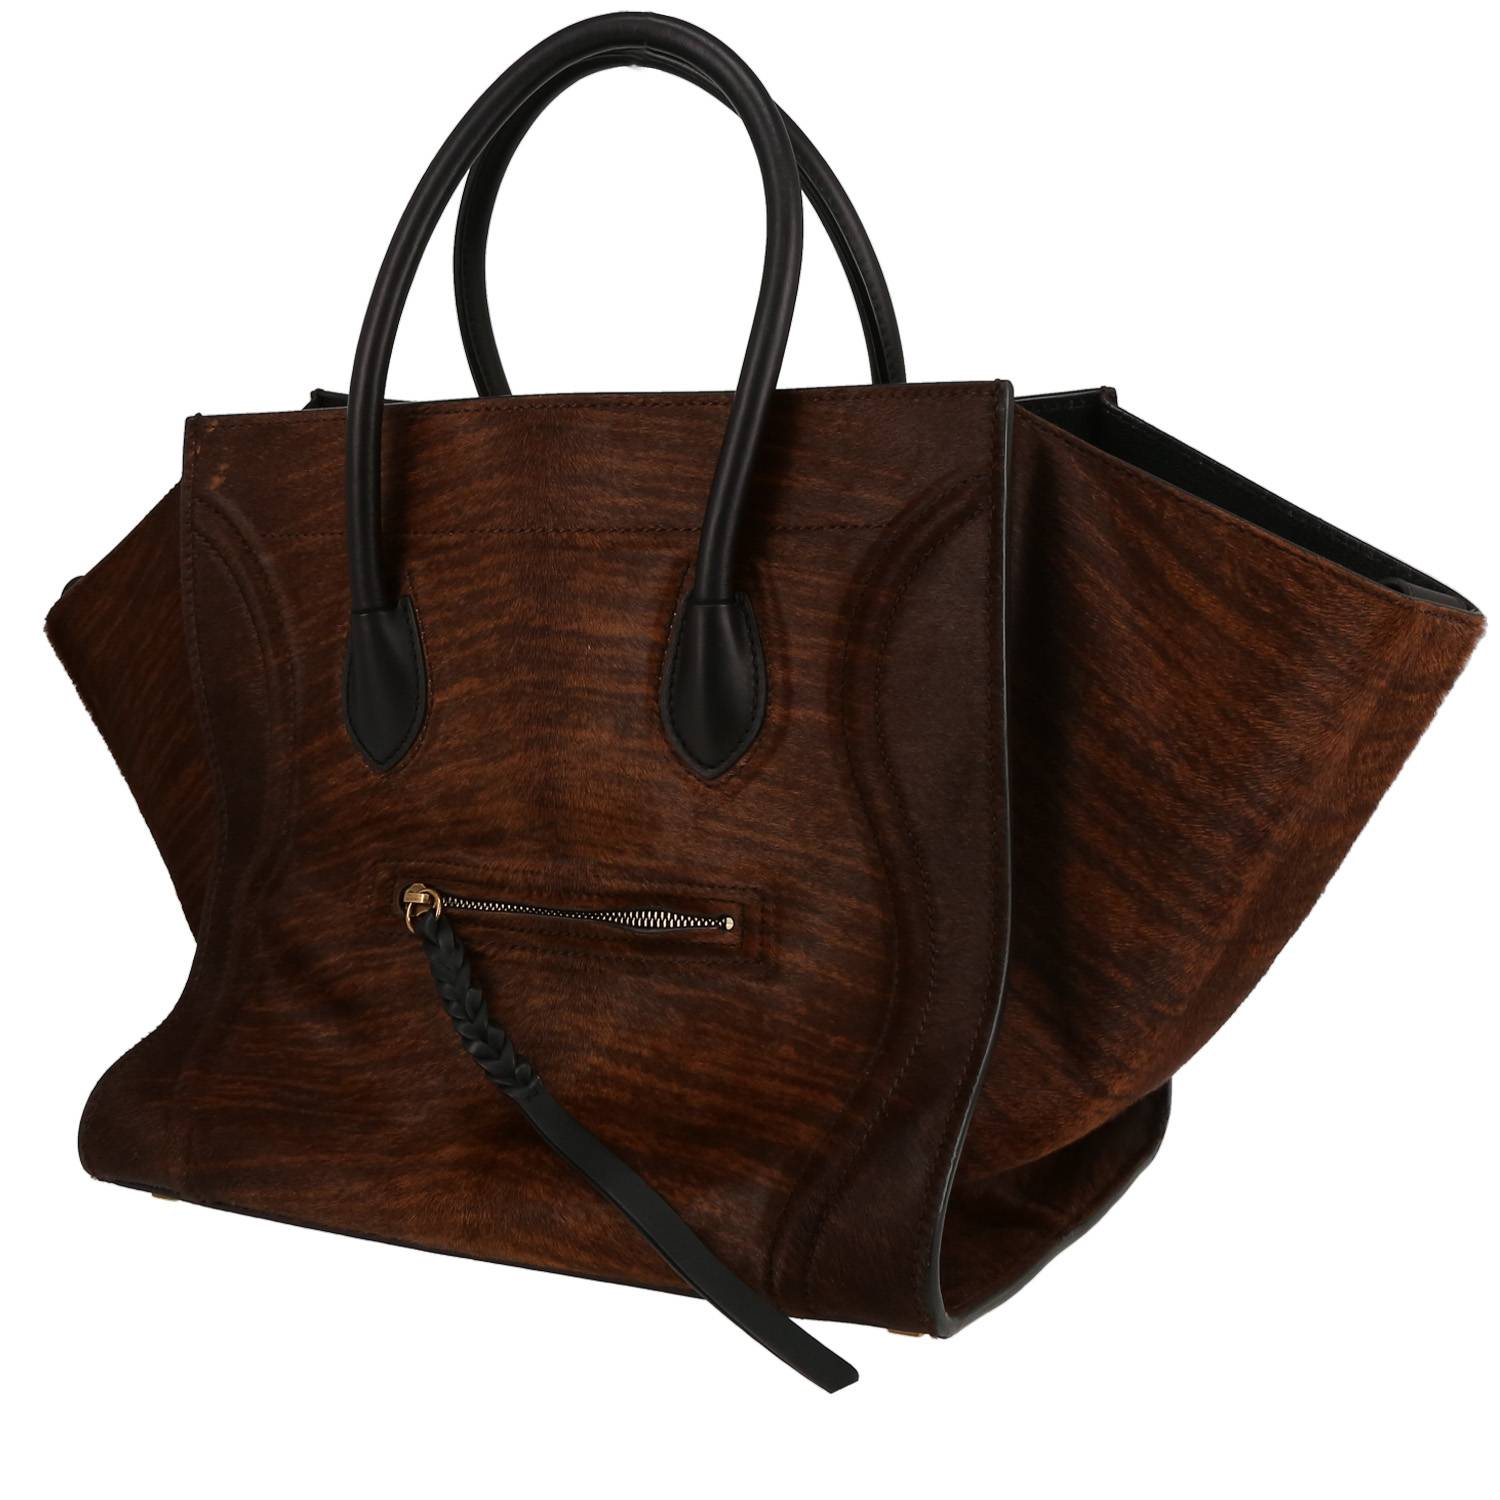 Phantom Shopping Bag In Brown Foal And Black Leather